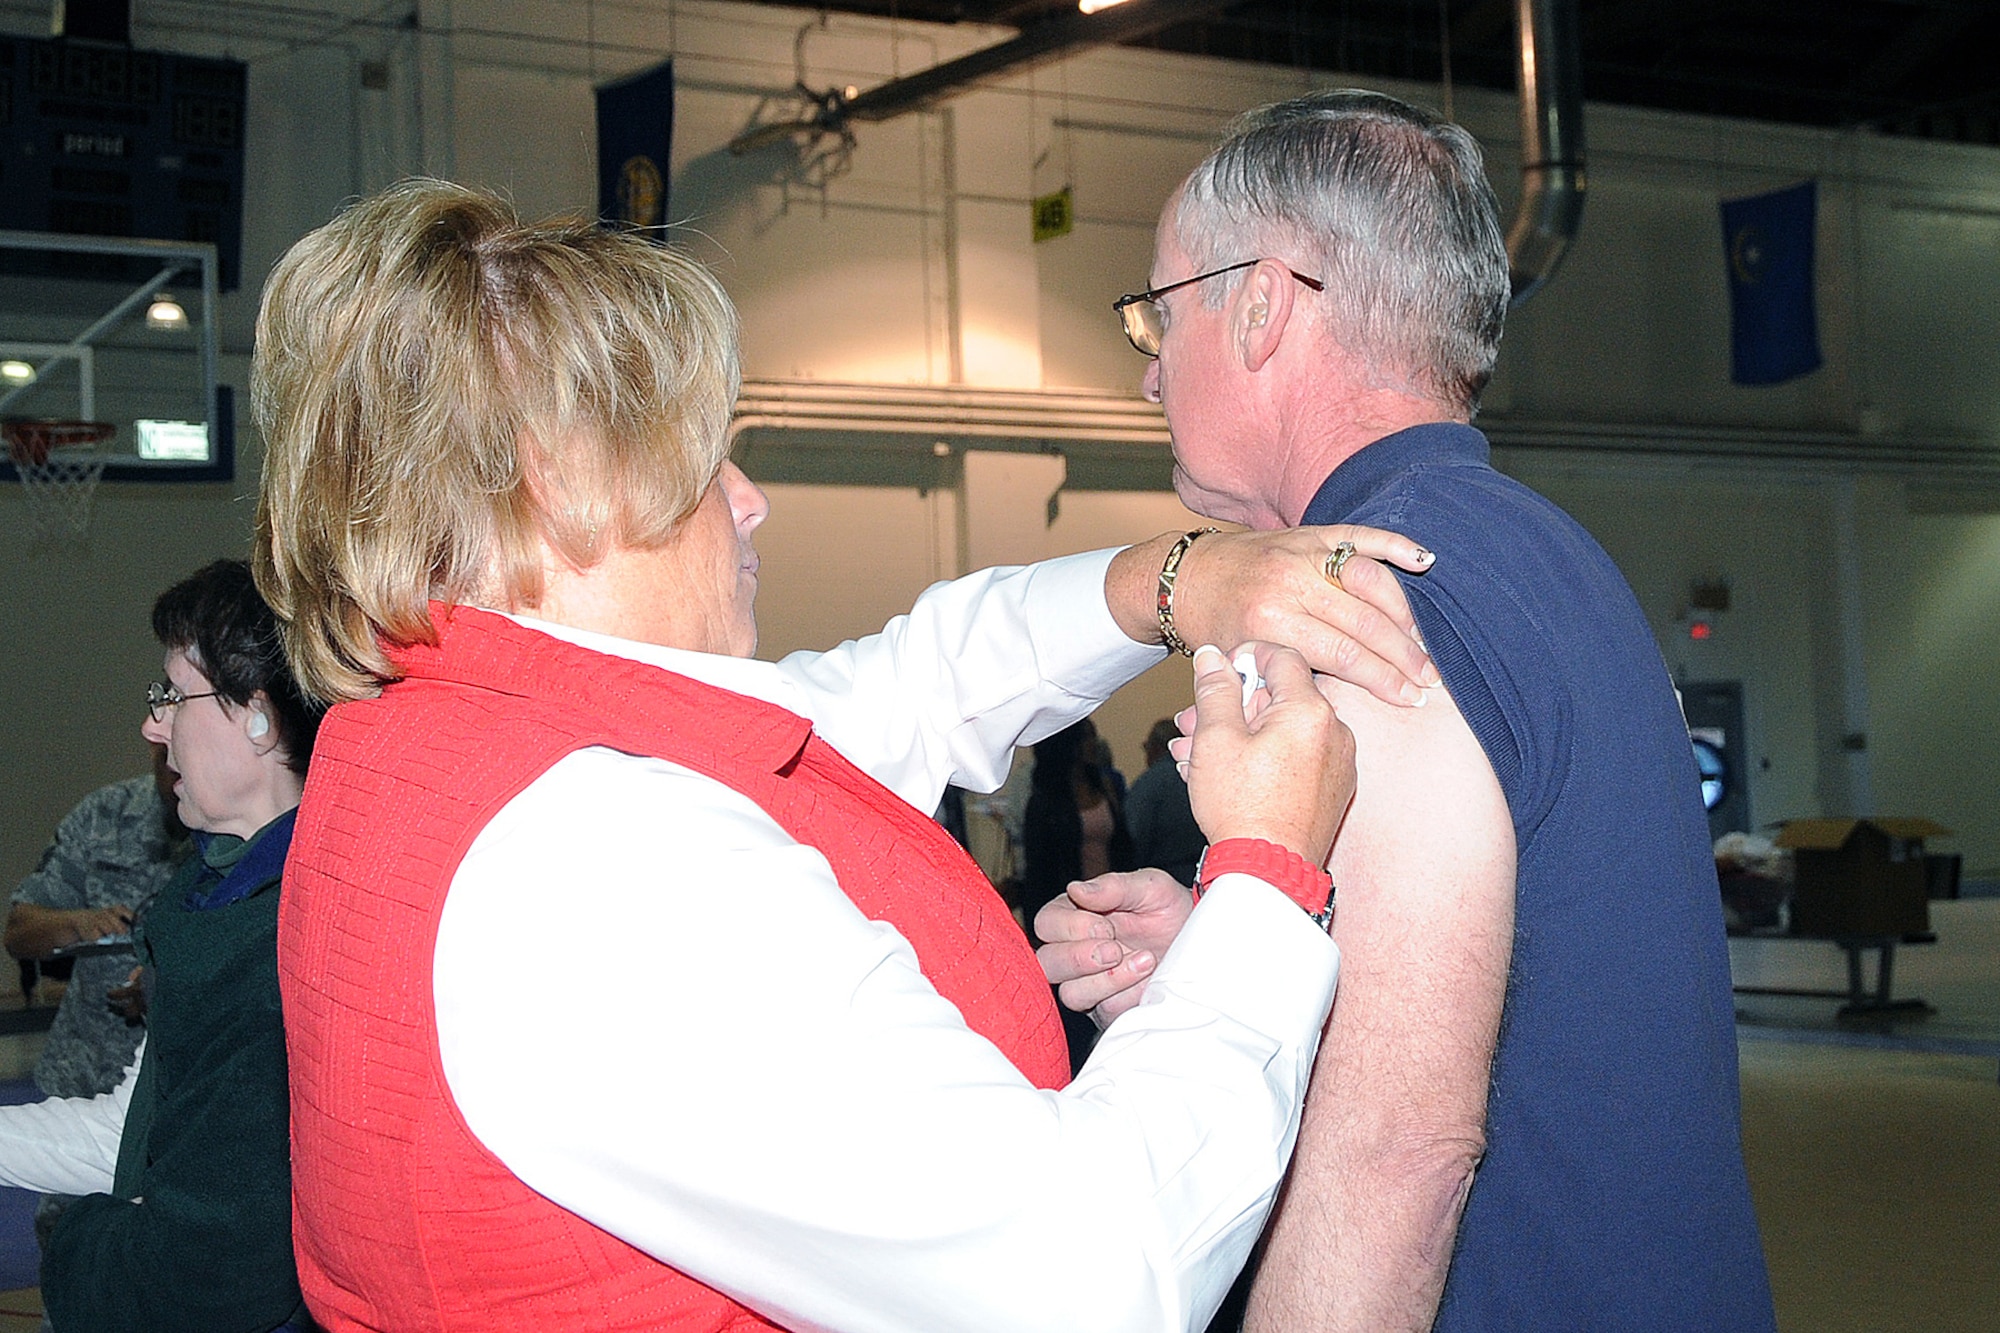 OFFUTT AIR FORCE BASE, Neb. - Robbin Alex, a registered nurse with the 55th Medical Group, administers a flu shot to Ron Pape, a retired U.S. Army Staff Sgt. during Offutt's annual Retiree Appreciation Day Oct. 17. This annual event was held at the Offutt Field House and gave retirees from the local area the opportunity to attend briefing and get information from a variety of agencies including the Retiree Activities Office, Airman & Family Readiness Center, Department of Veteran Affairs, Survivor Benefits, the Erhling Bergquist medical clinic, Legal Office and Dental Services in addition to immunizations. U.S. Air Force photo by Kendra Williams